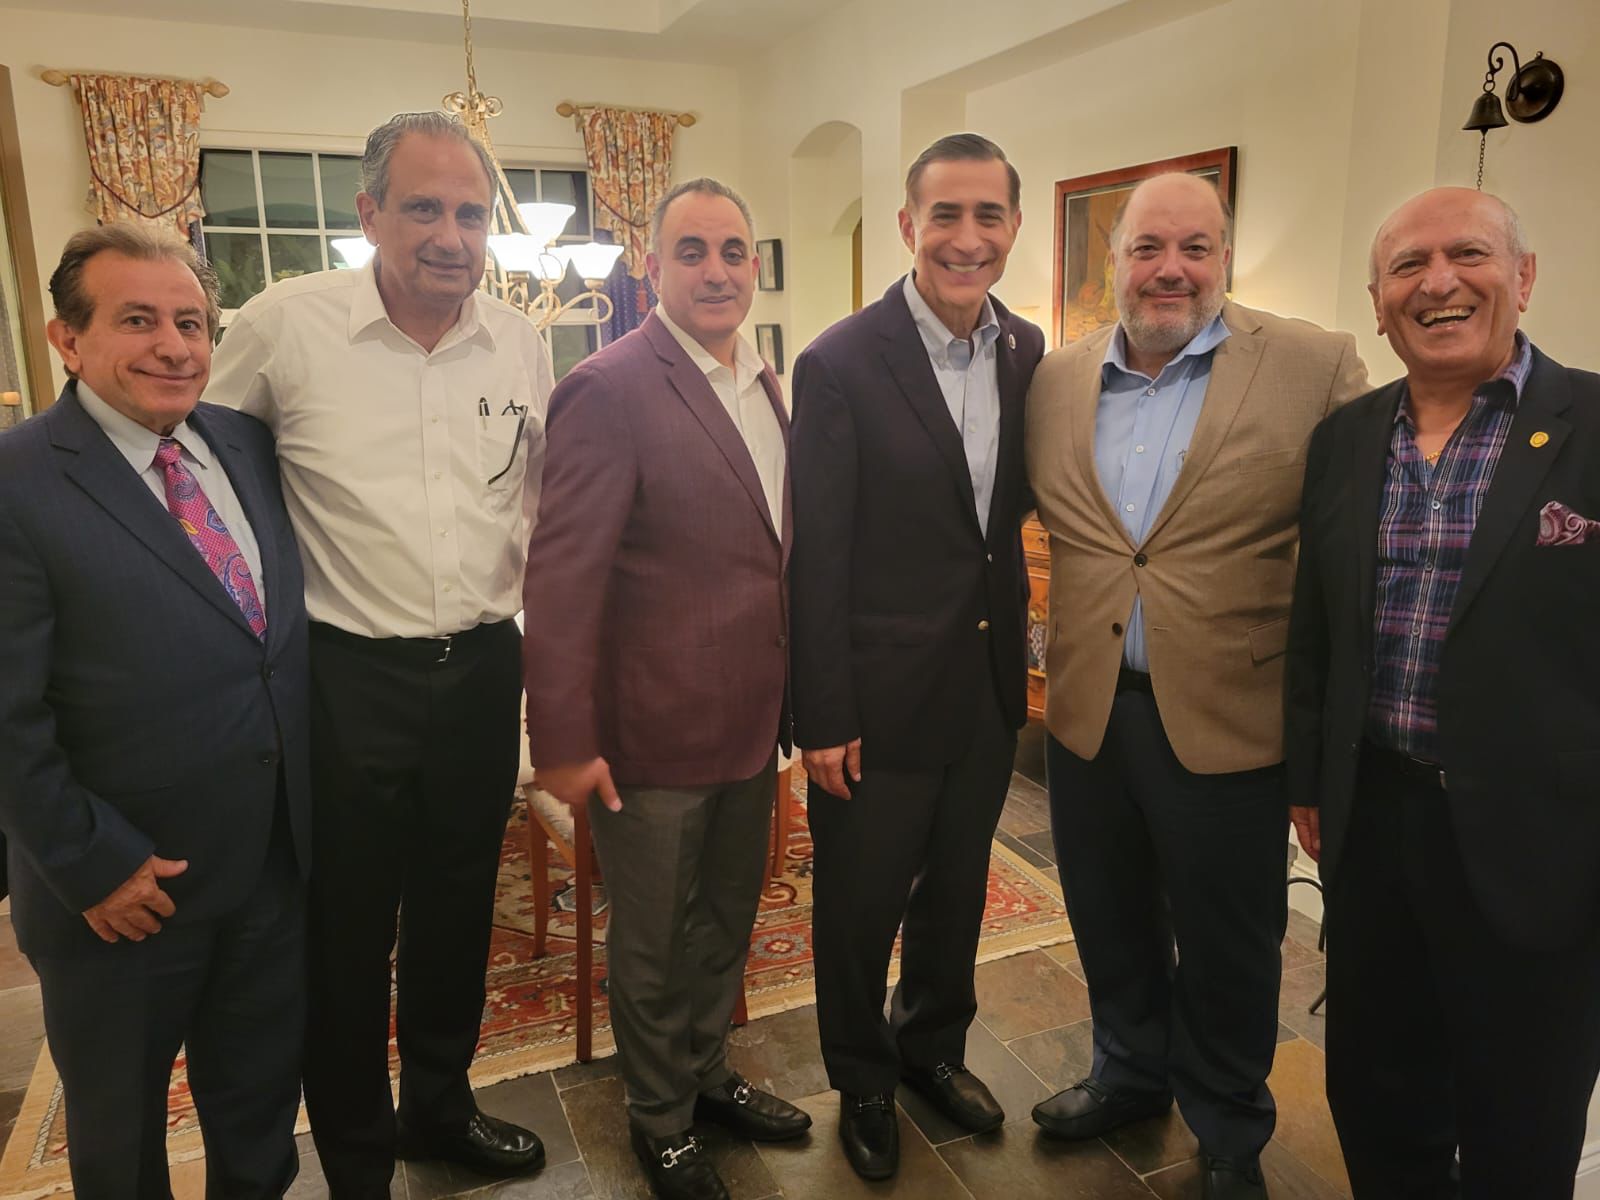 Fundraising event to support the re-election of Congressman Issa